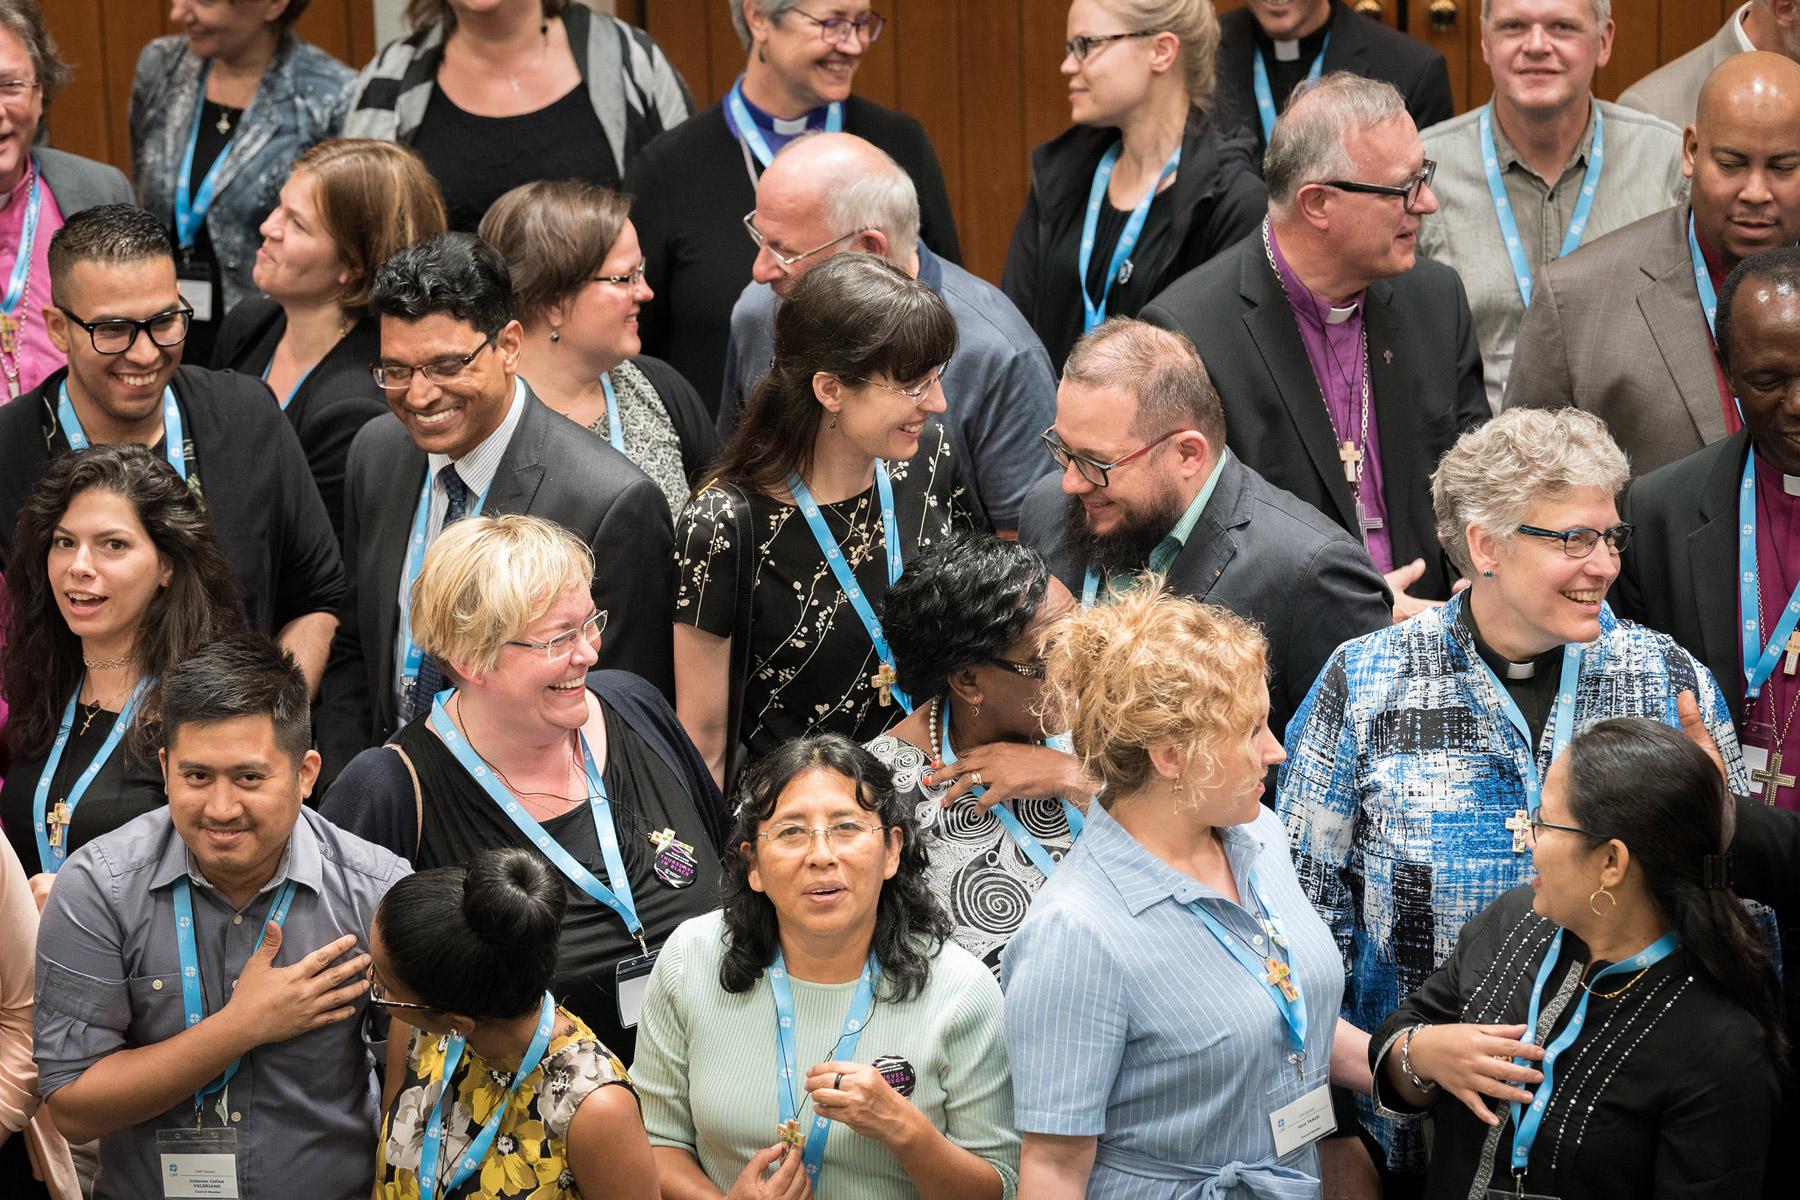 The LWF Council meets yearly and is the highest authority of the LWF between assemblies. The 2018 LWF Council met in Geneva. Photo: Albin Hillert/LWF